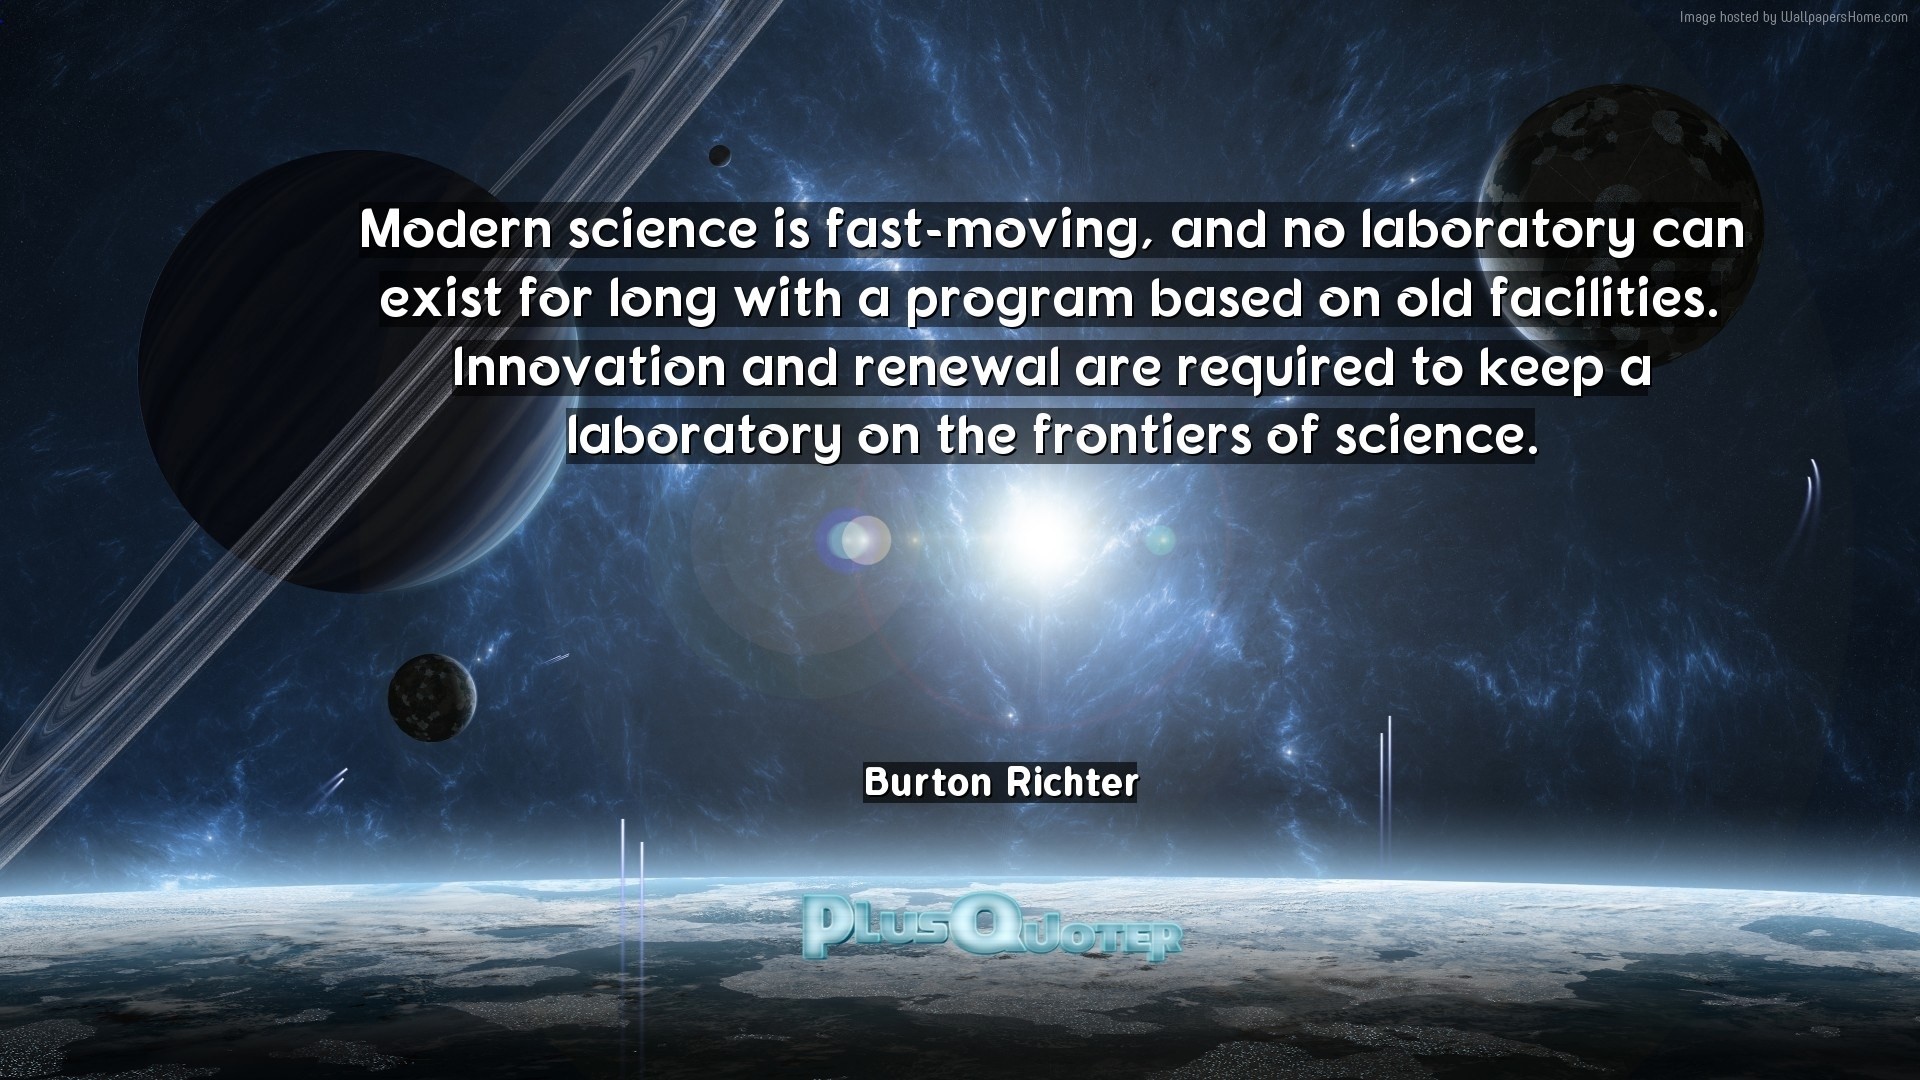 1920x1080 Download Wallpaper with inspirational Quotes- "Modern science is  fast-moving, and no